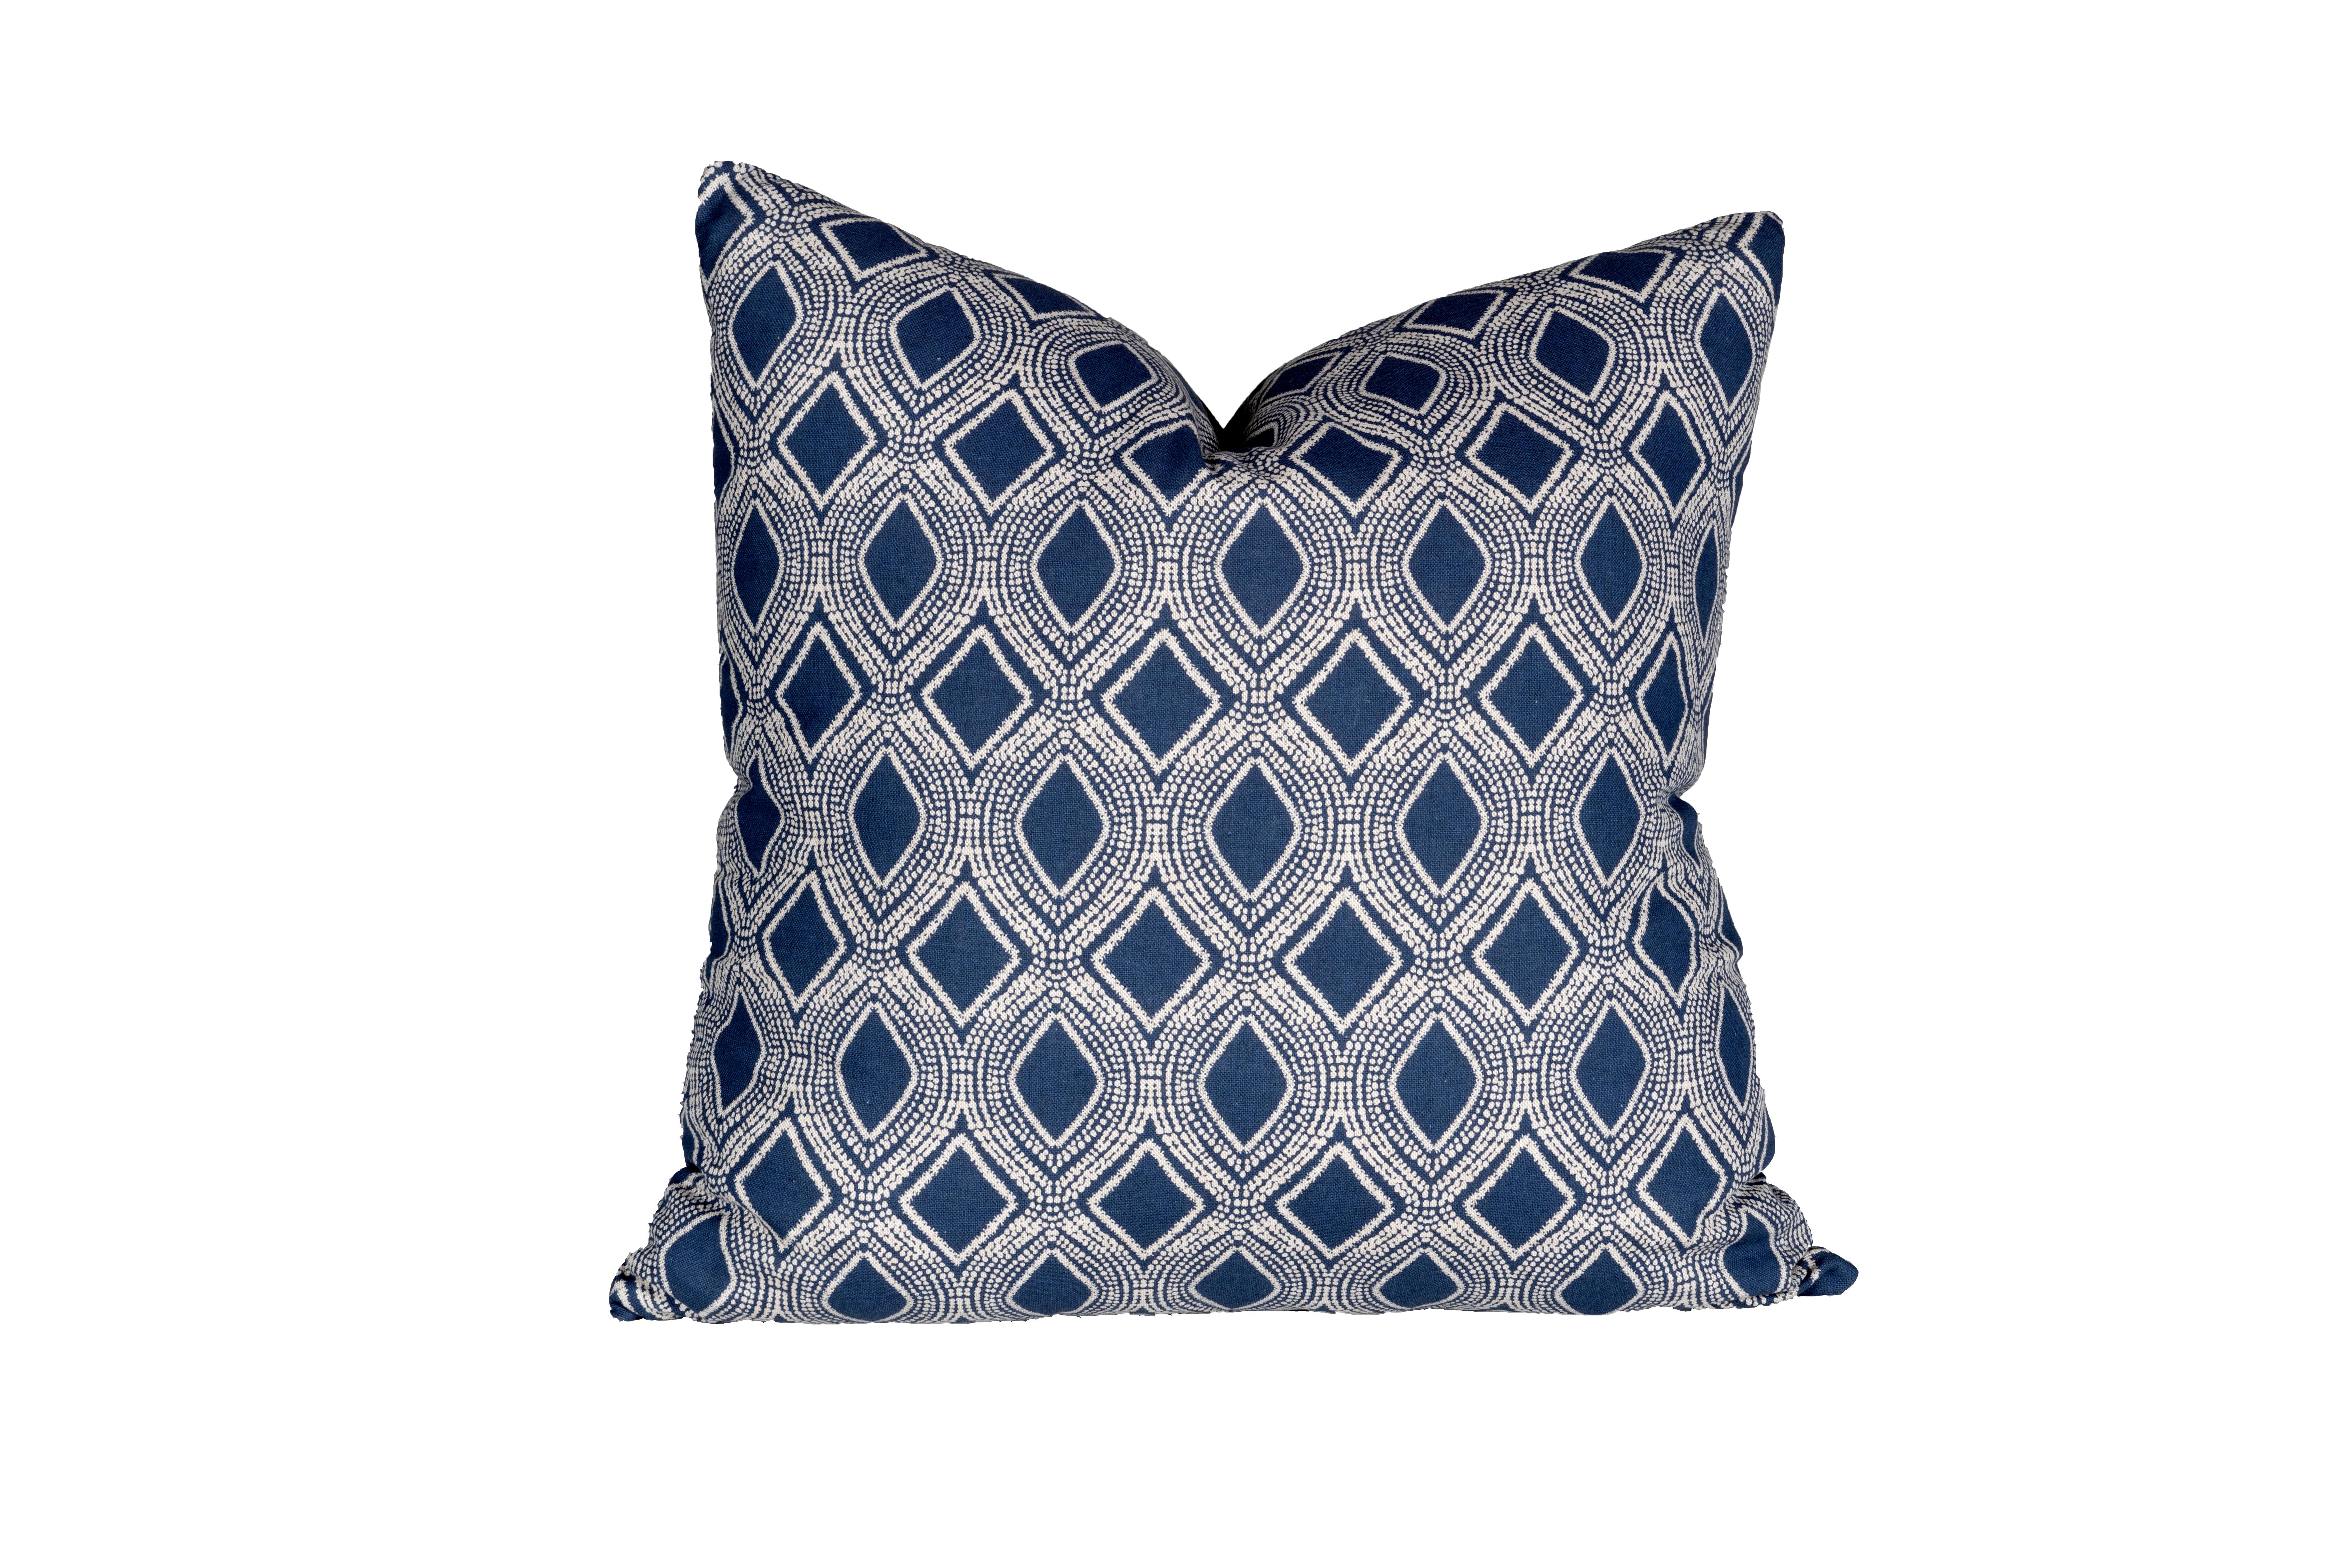 Add a touch of elegance to your bed or sofa with this beautiful pillow. The vintage damask Art Deco pattern features a bold, geometric rhombus design. Filled with soft down feather fillers, it creates a cushy feel that is both supportive and